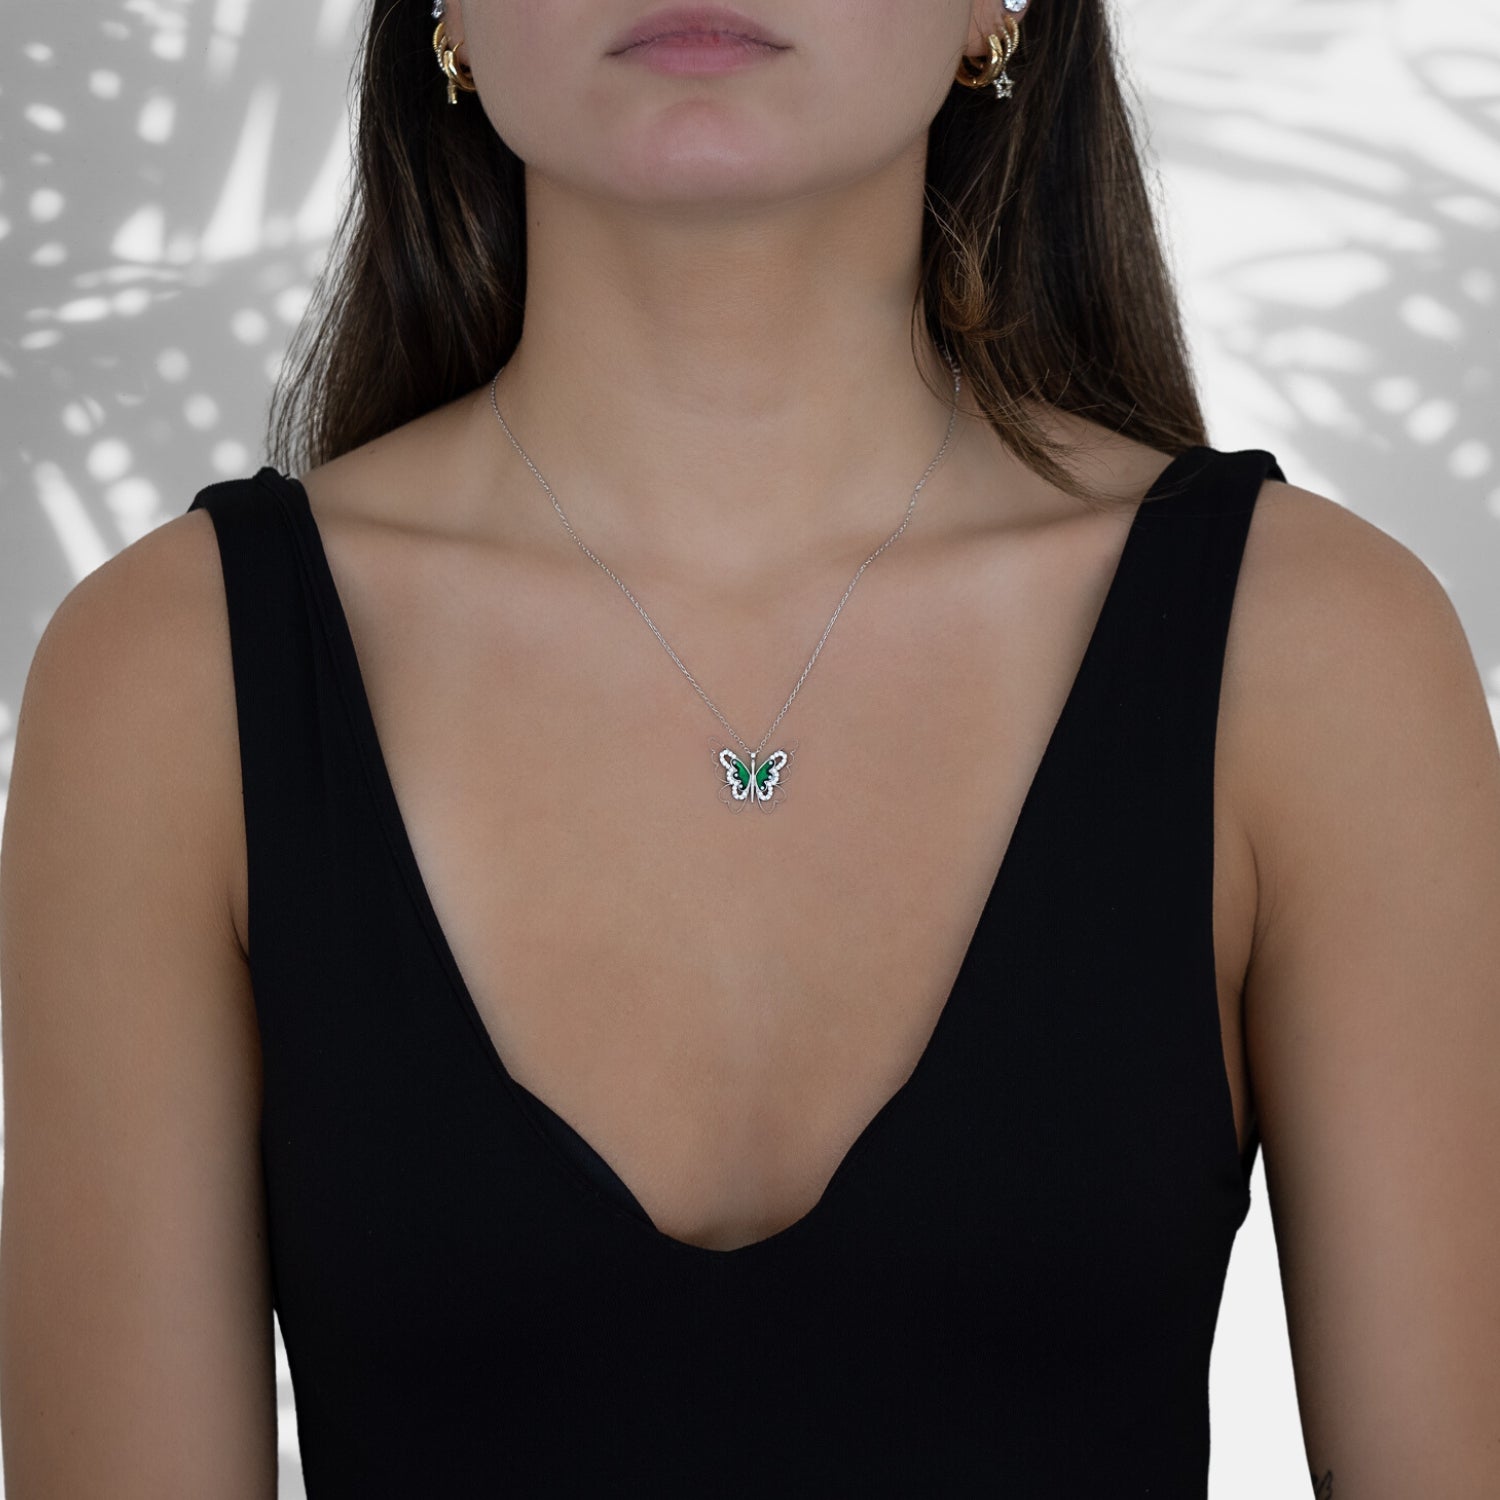 The Abundance Green Butterfly Necklace complementing the model&#39;s style with grace and beauty.